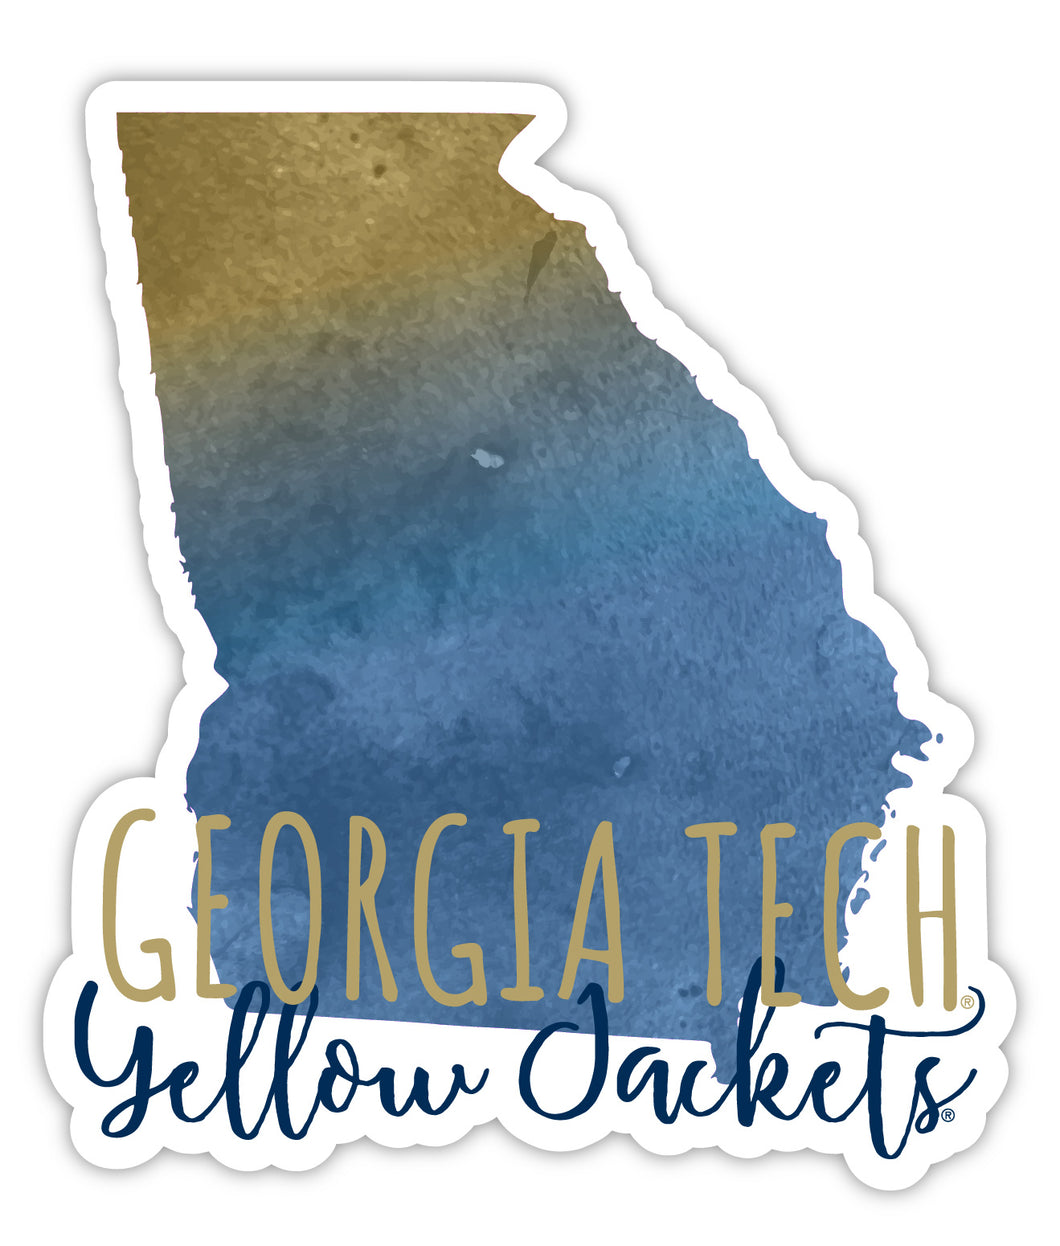 Georgia Tech Yellow Jackets 4-Inch Watercolor State Shaped NCAA Vinyl Decal Sticker for Fans, Students, and Alumni